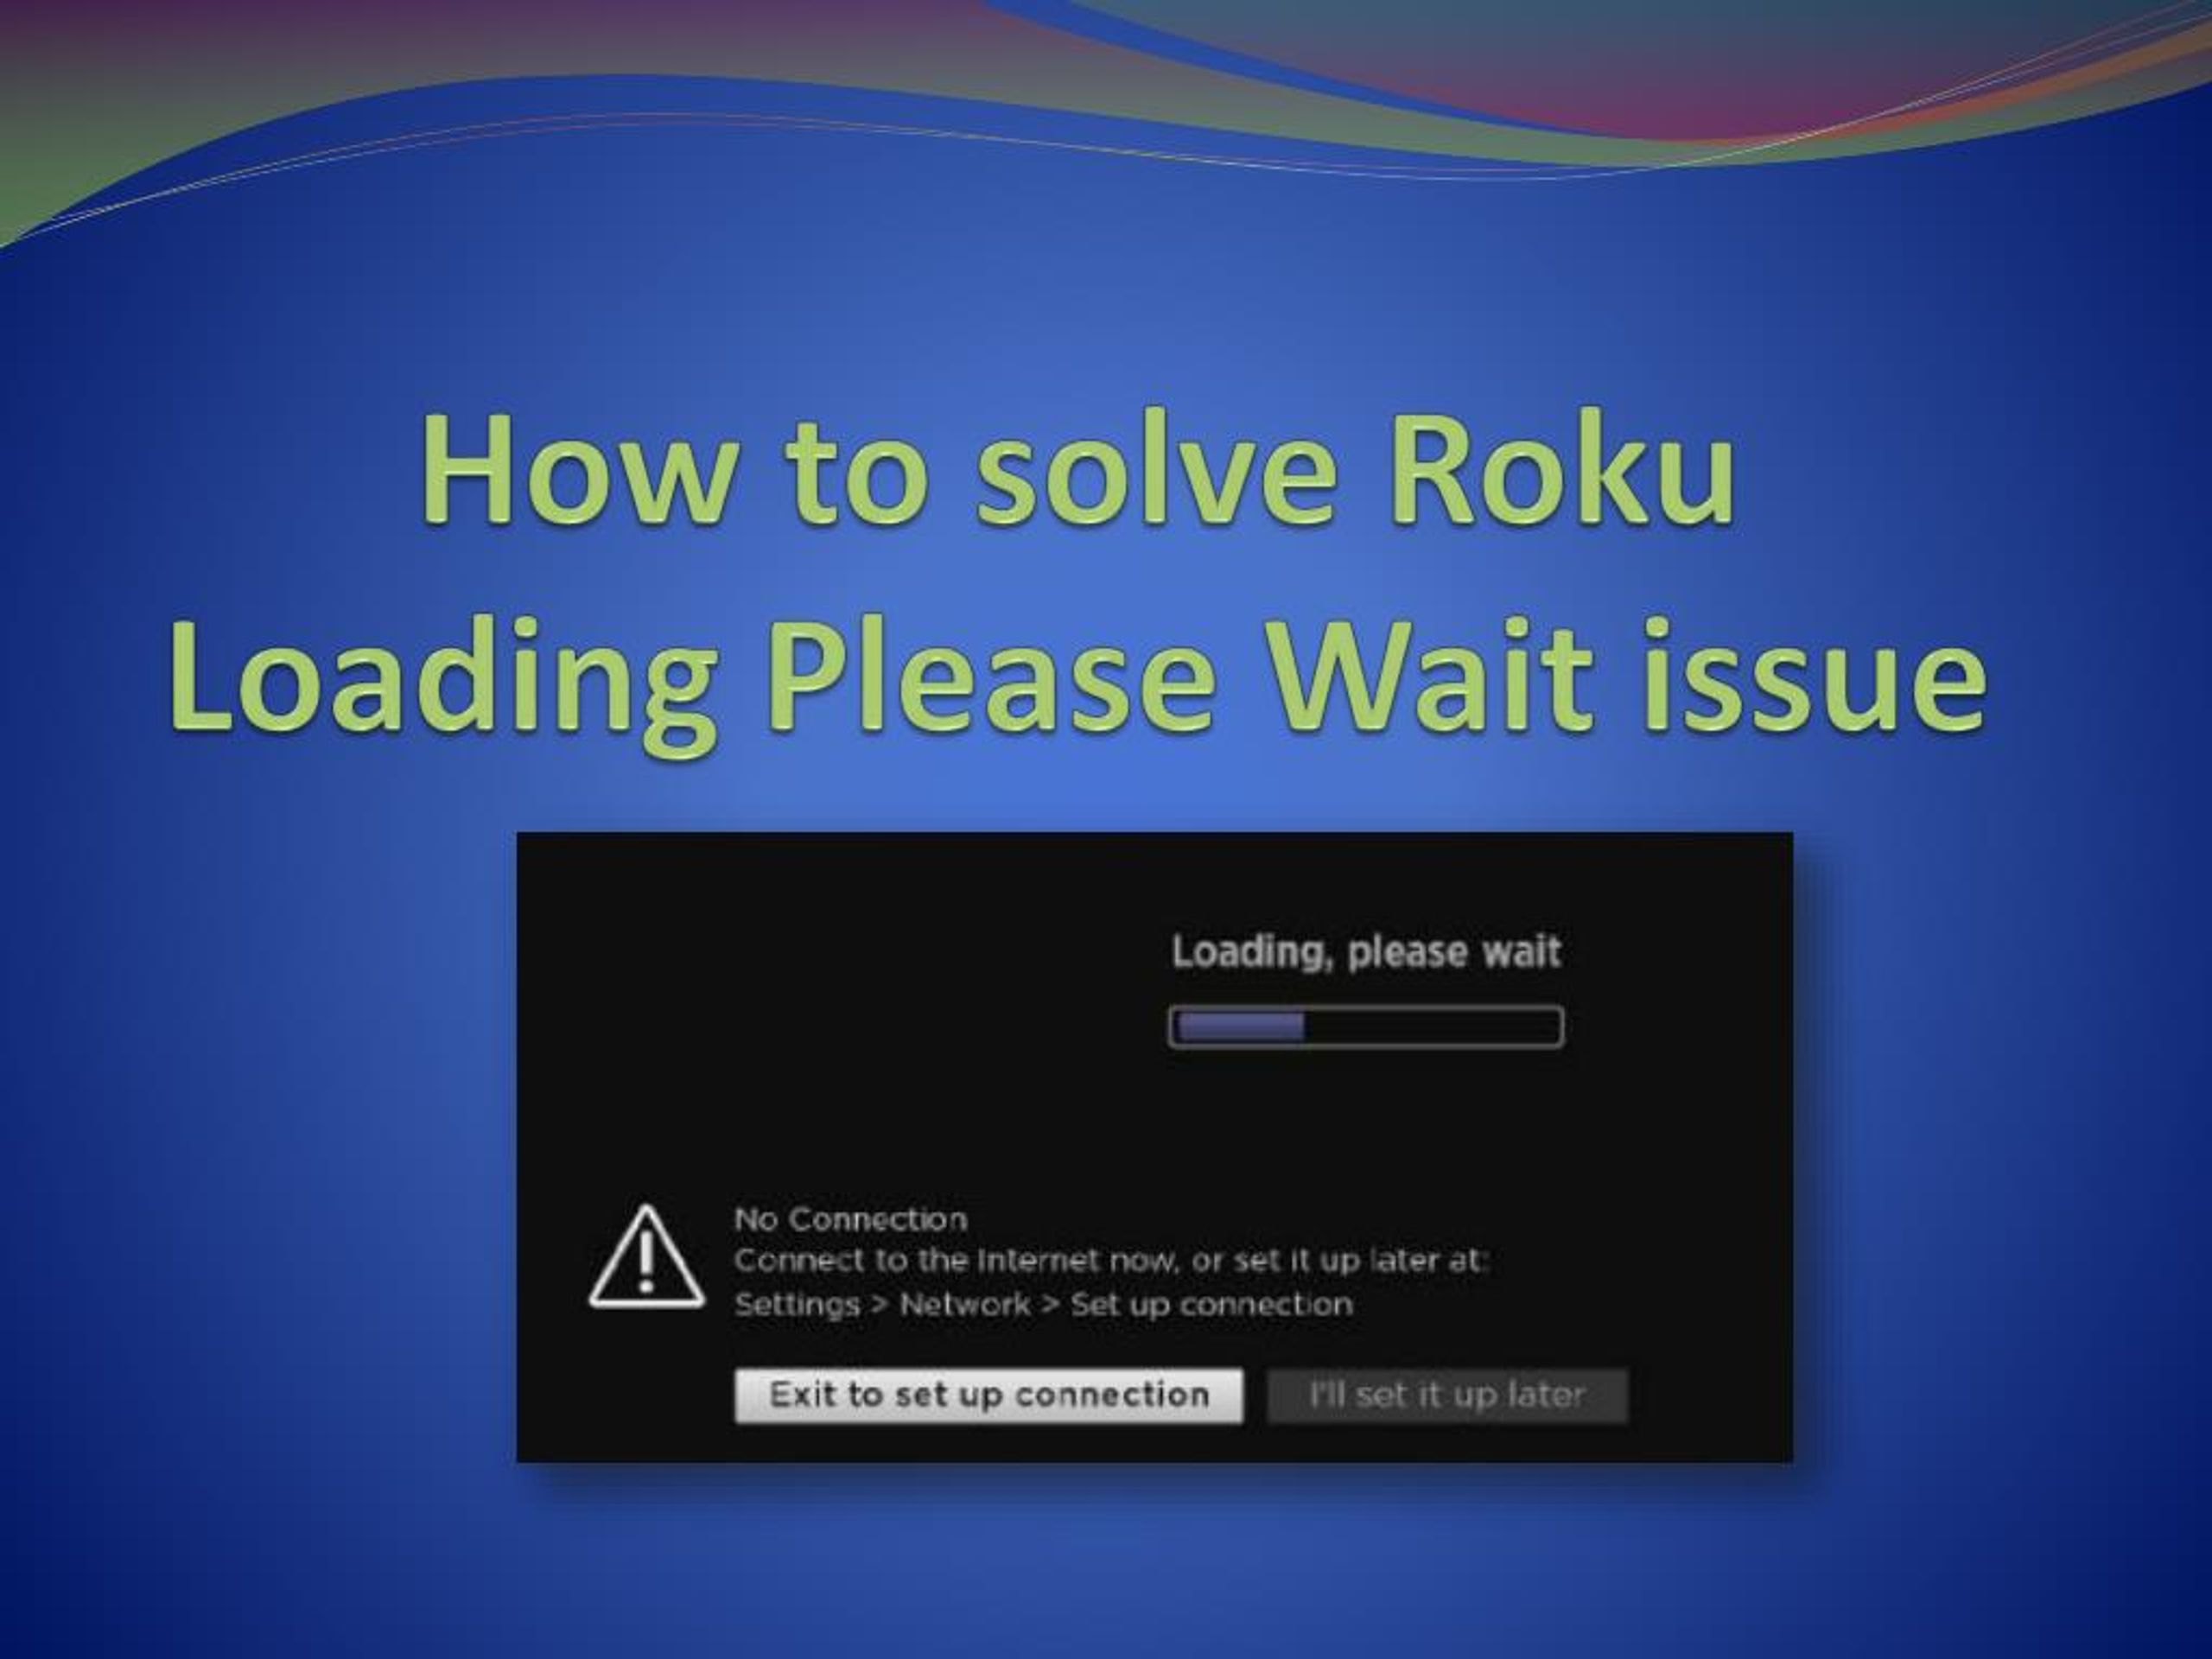 Ppt How To Solve Roku Loading Please Wait Issue Powerpoint Presentation Id